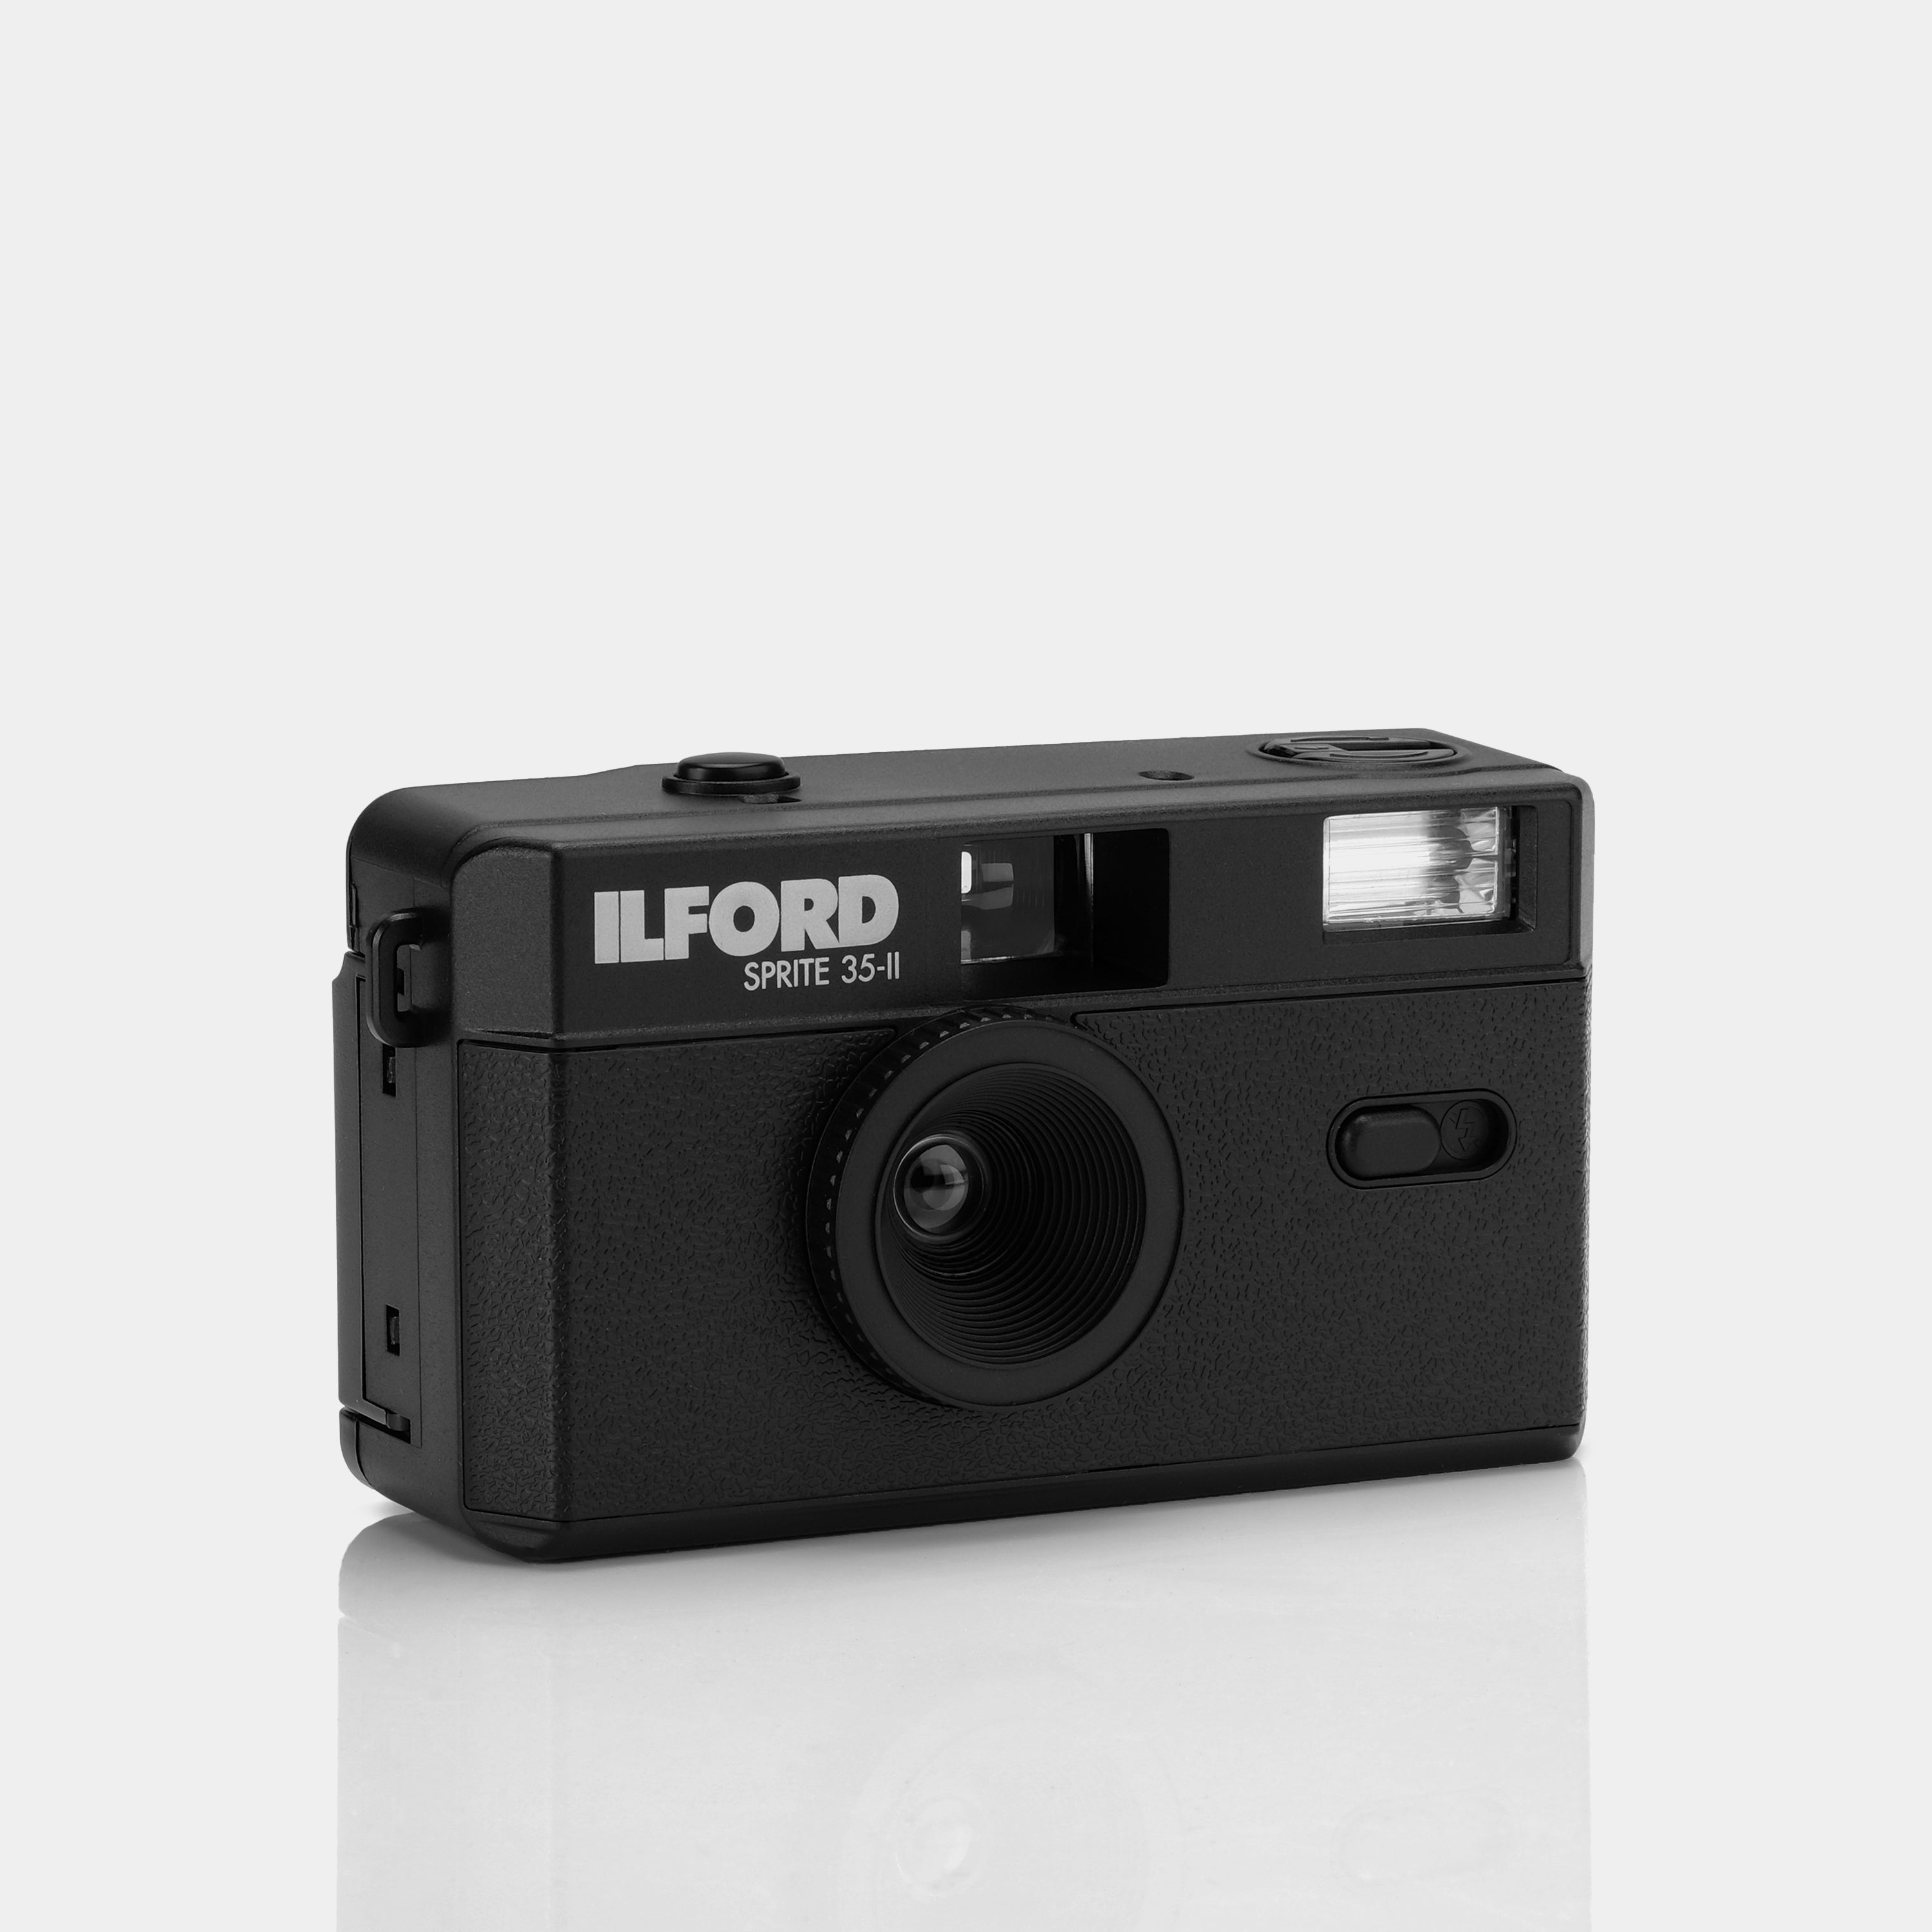 Ilford Sprite 35-II Reusable 35mm Point and Shoot Film Camera - Black